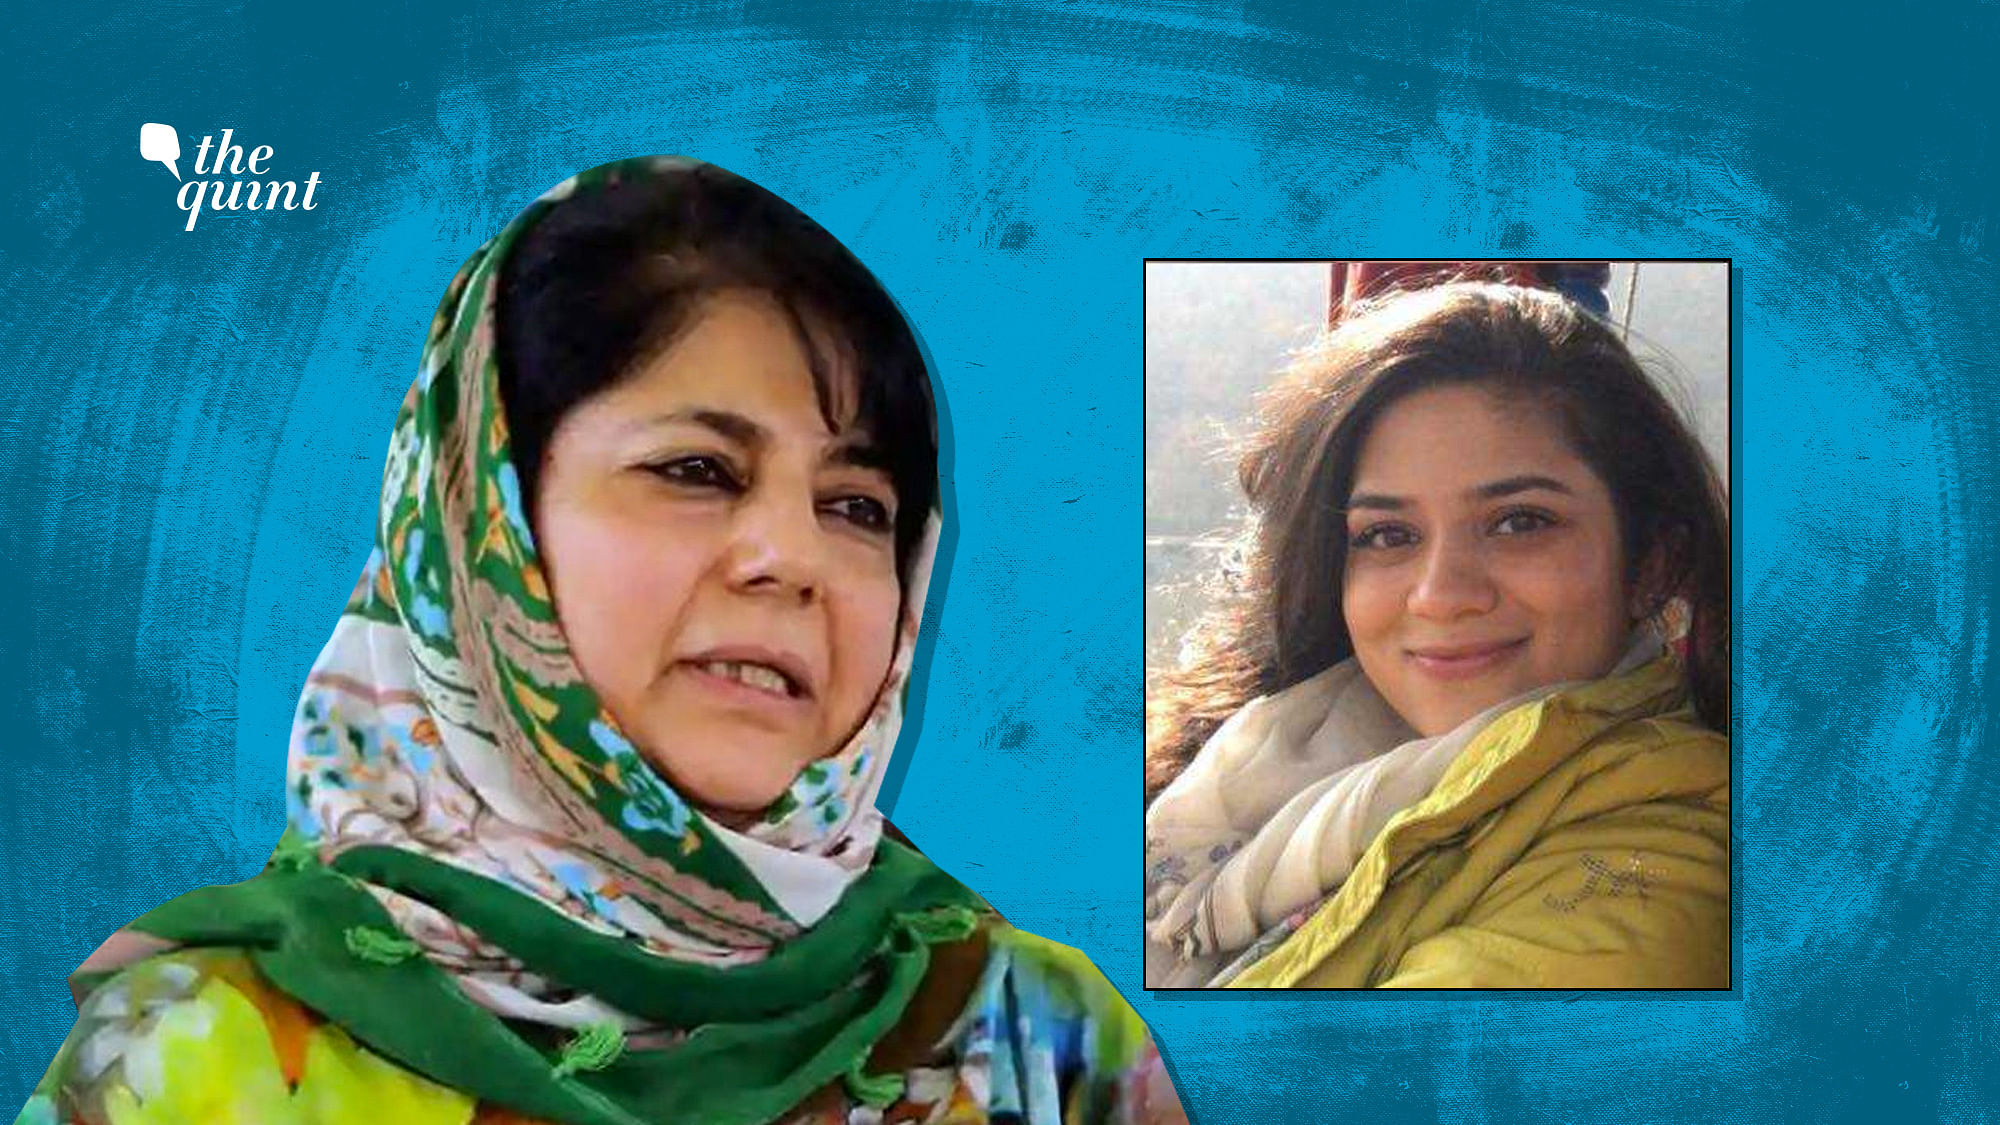 The daughter of former Jammu and Kashmir Chief Minister Mehbooba Mufti, has written to the government on behalf of her mother seeking information on the state of affairs in Jammu and Kashmir, post abrogation of Article 370.